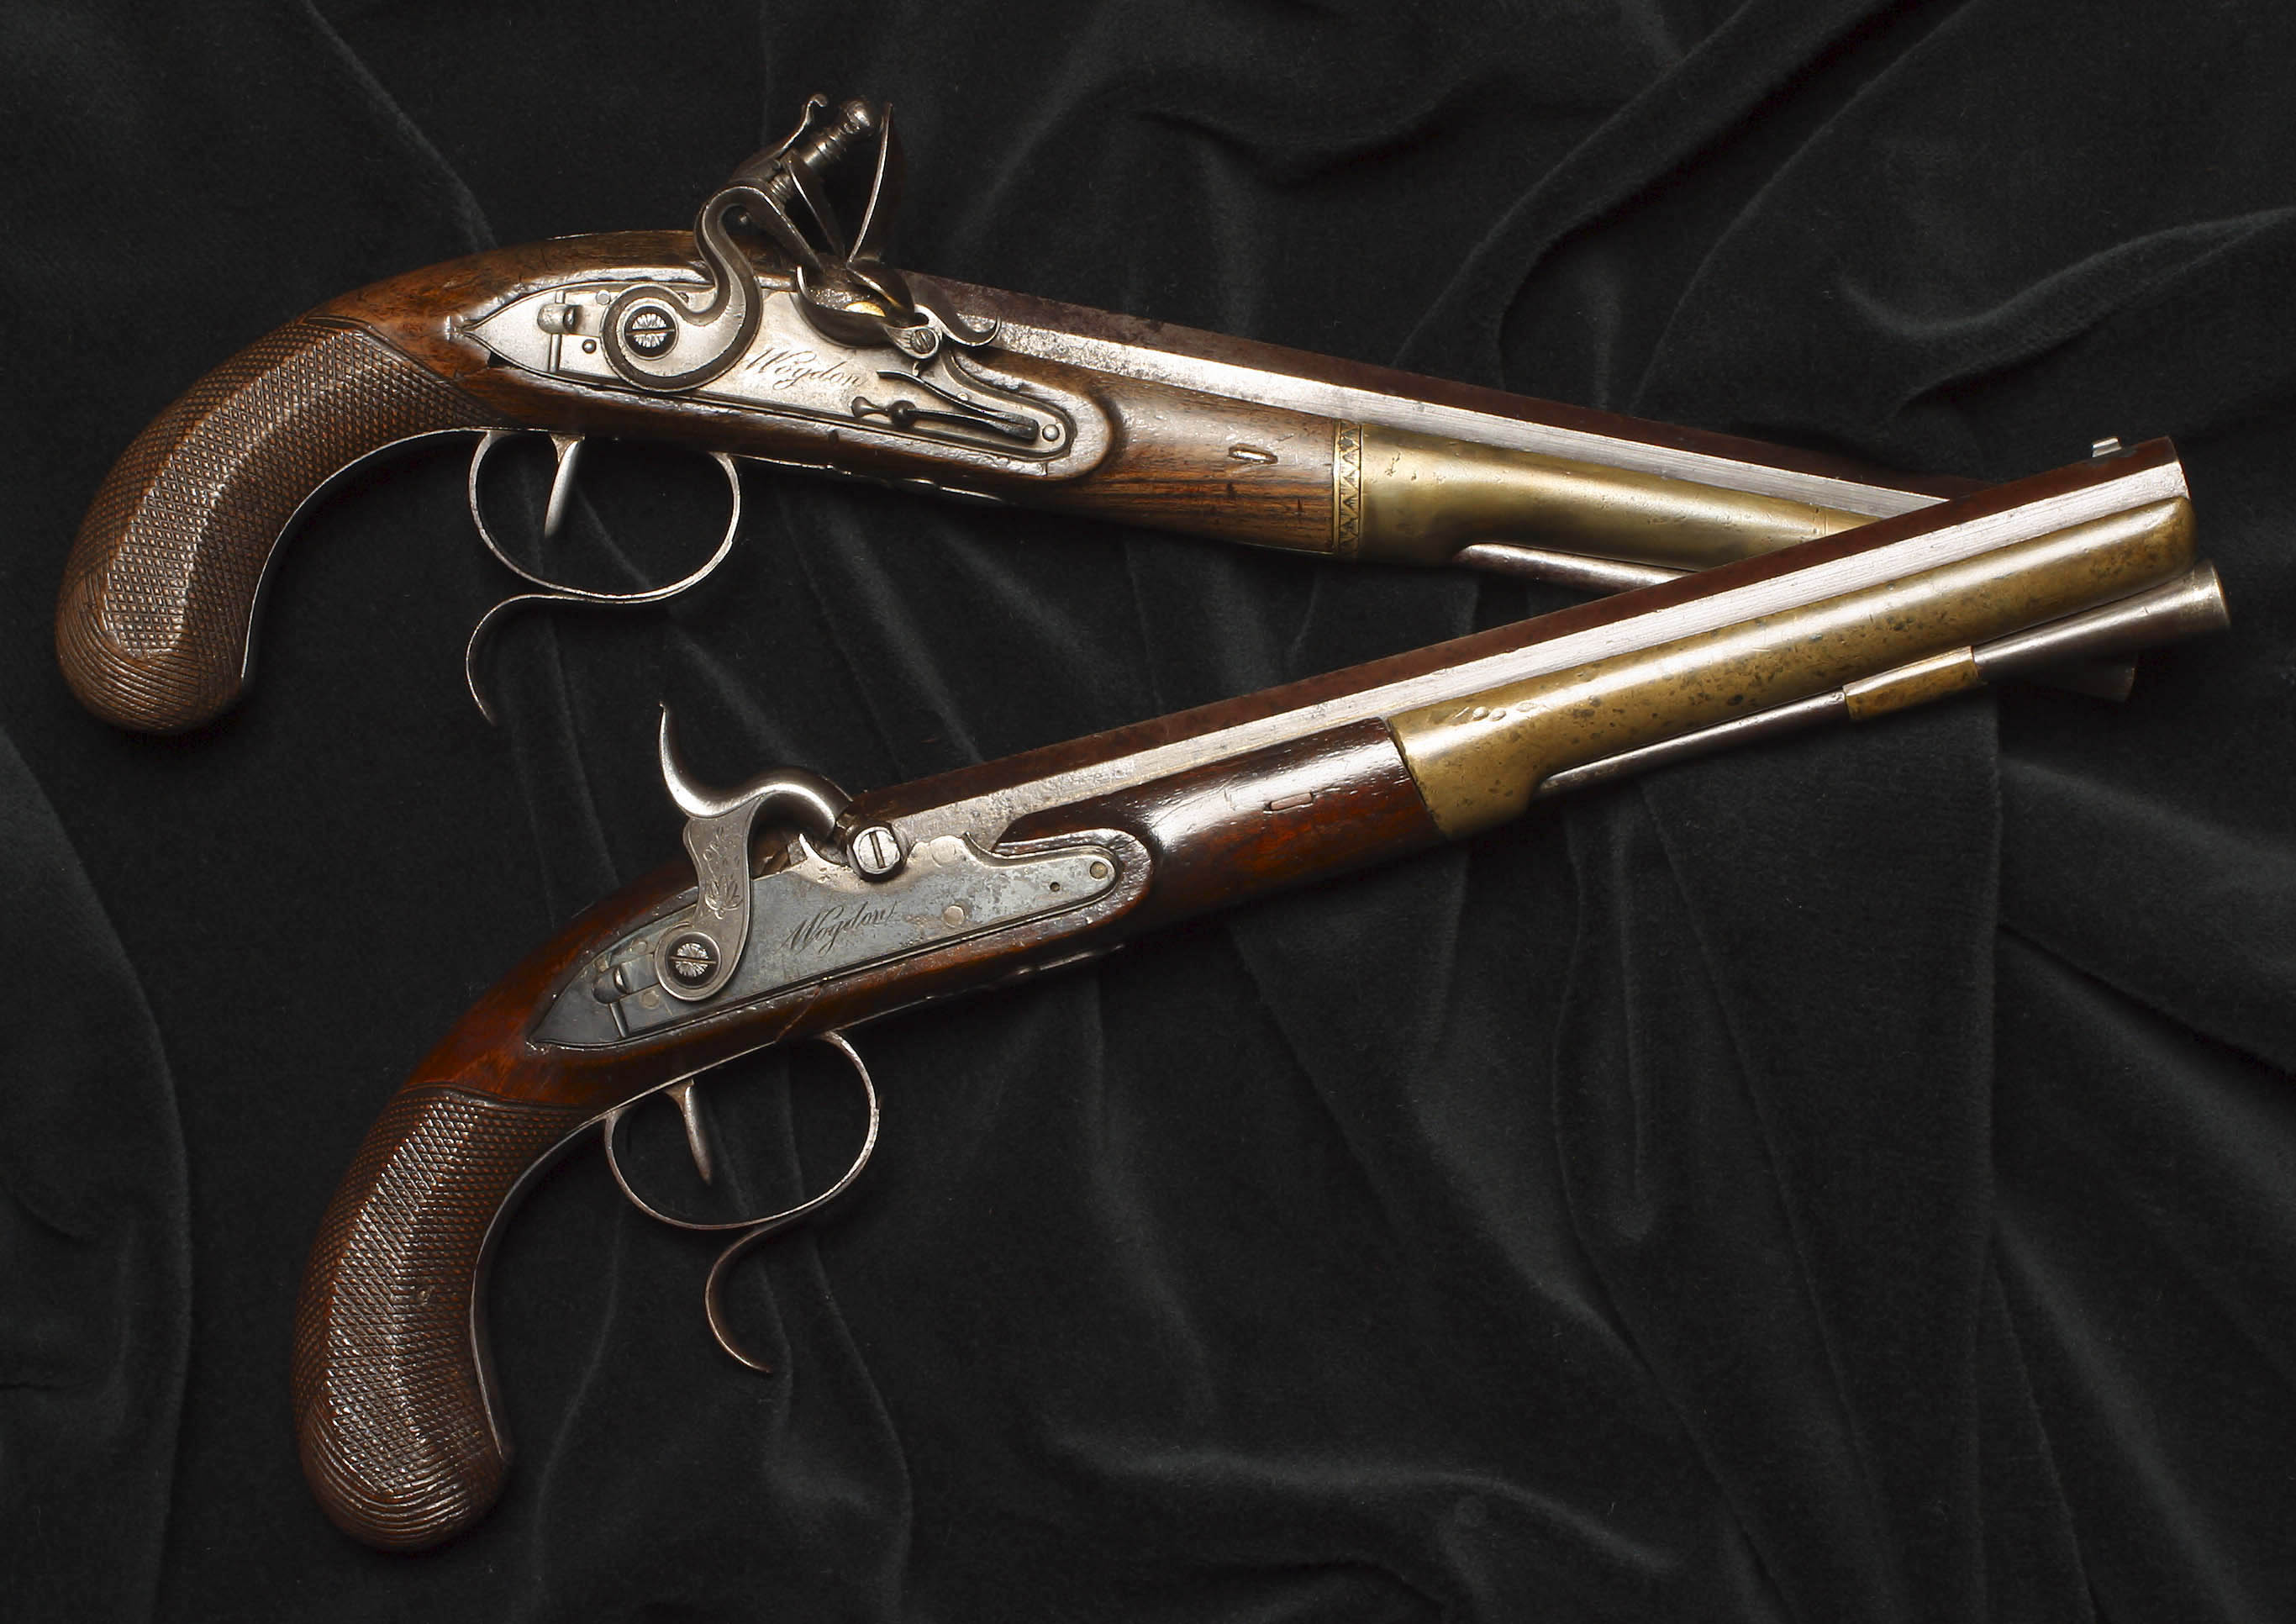 Pair of dueling pistols